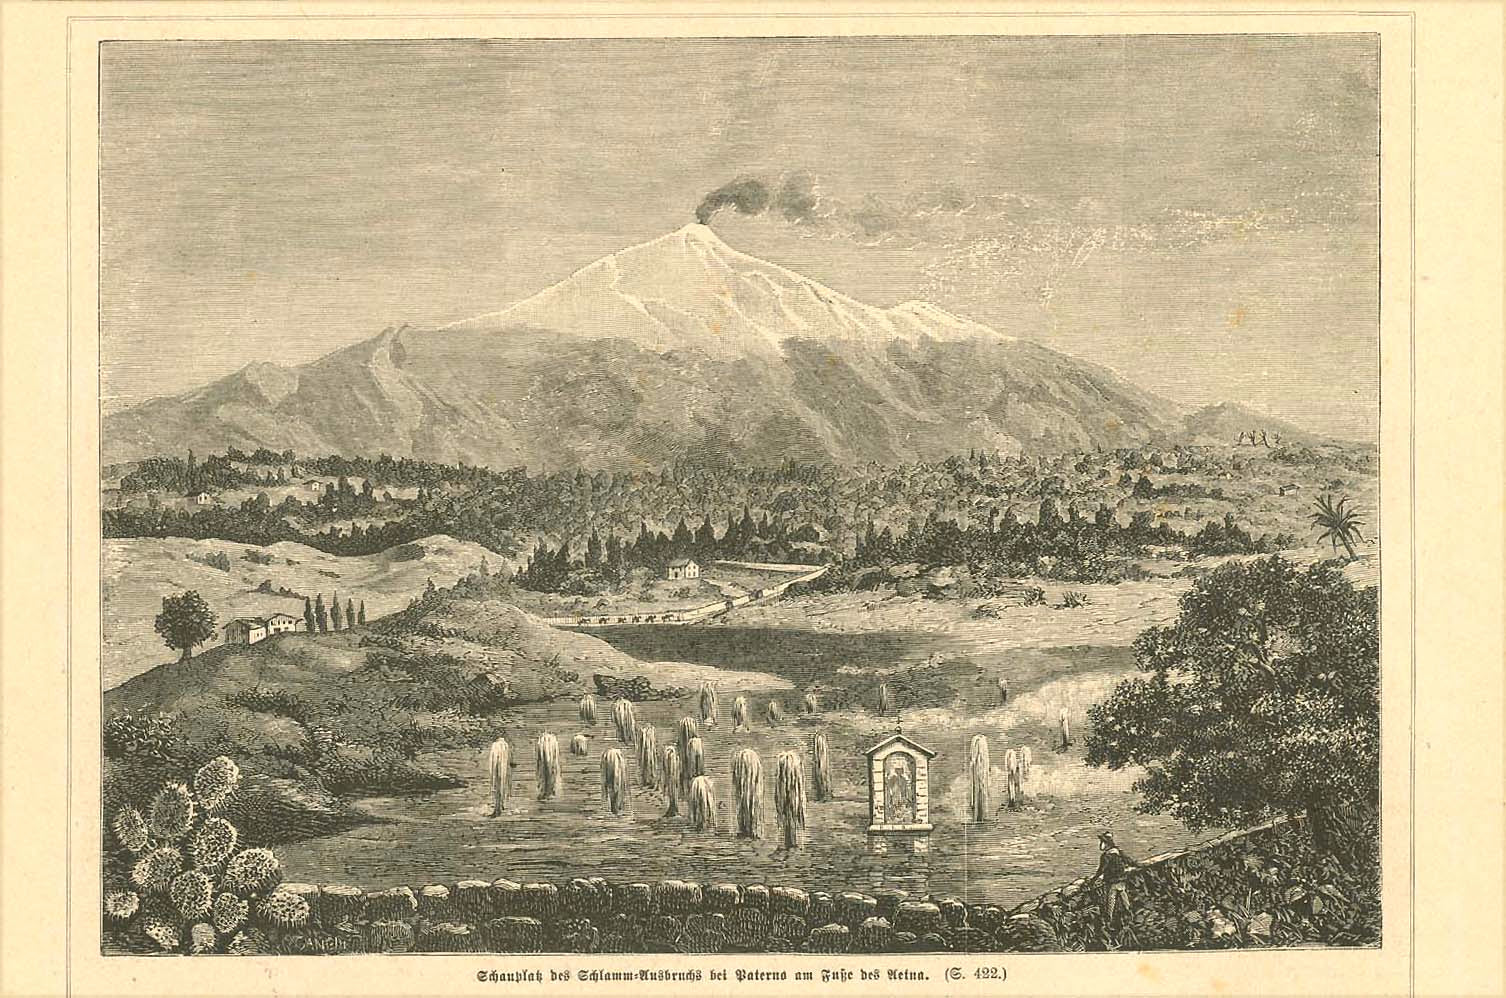 Sicily, Etna, "Schauplatz des Schlamm-Ausbruchs be Paterno am Fusse des Aetna" (Location of the mud eruption by Paterno at the foot of Mt. Etna)  Wood engraving published 1879.  Original antique print , interior design, wall decoration, ideas, idea, gift ideas, present, vintage, charming, special, decoration, home interior, living room design